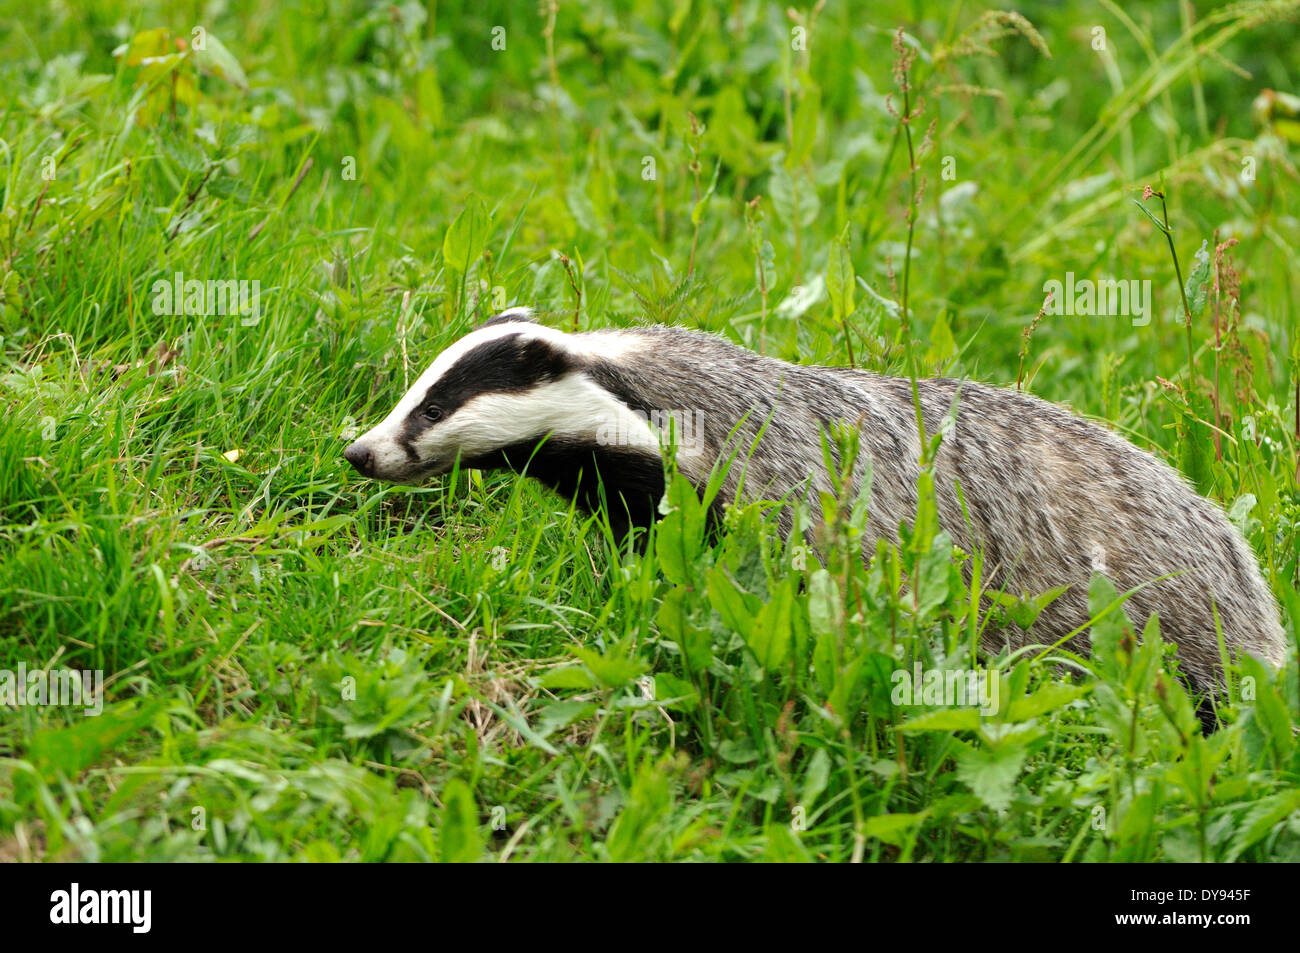 Badger, Meles meles, spring, meadow, mustelidae, martens, animal, animals, Germany, Europe, Stock Photo